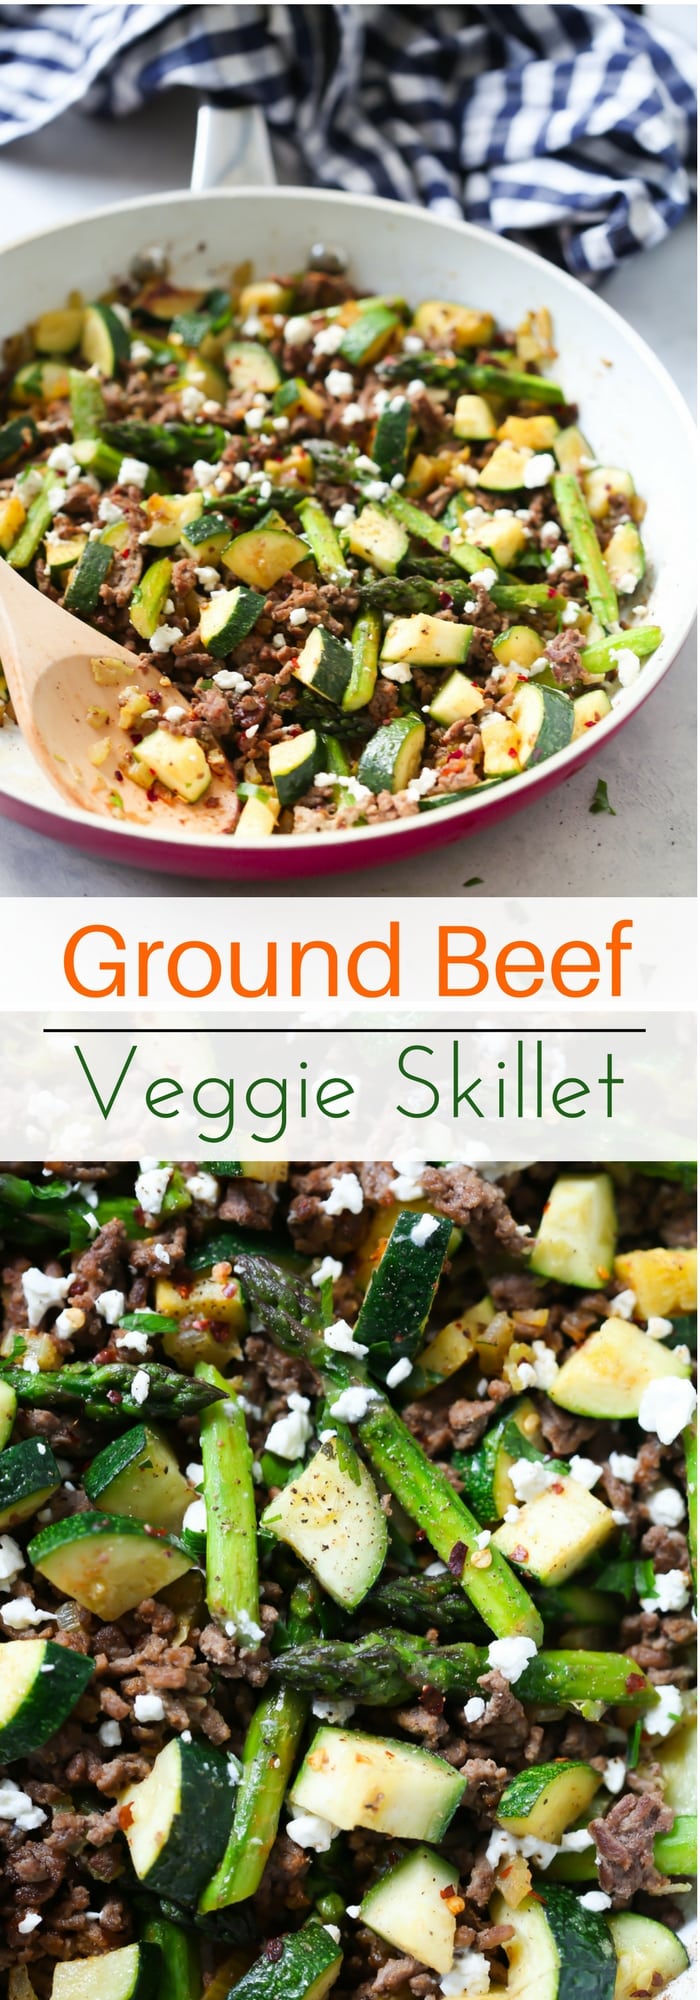 Ground Beef Veggie Skillet - This Ground Beef Veggie Skillet is made with onions, bell pepper, zucchini, asparagus and of course ground beef. And it can be ready from start to finish in 30 mins. It's also low-carb and gluten-free. 